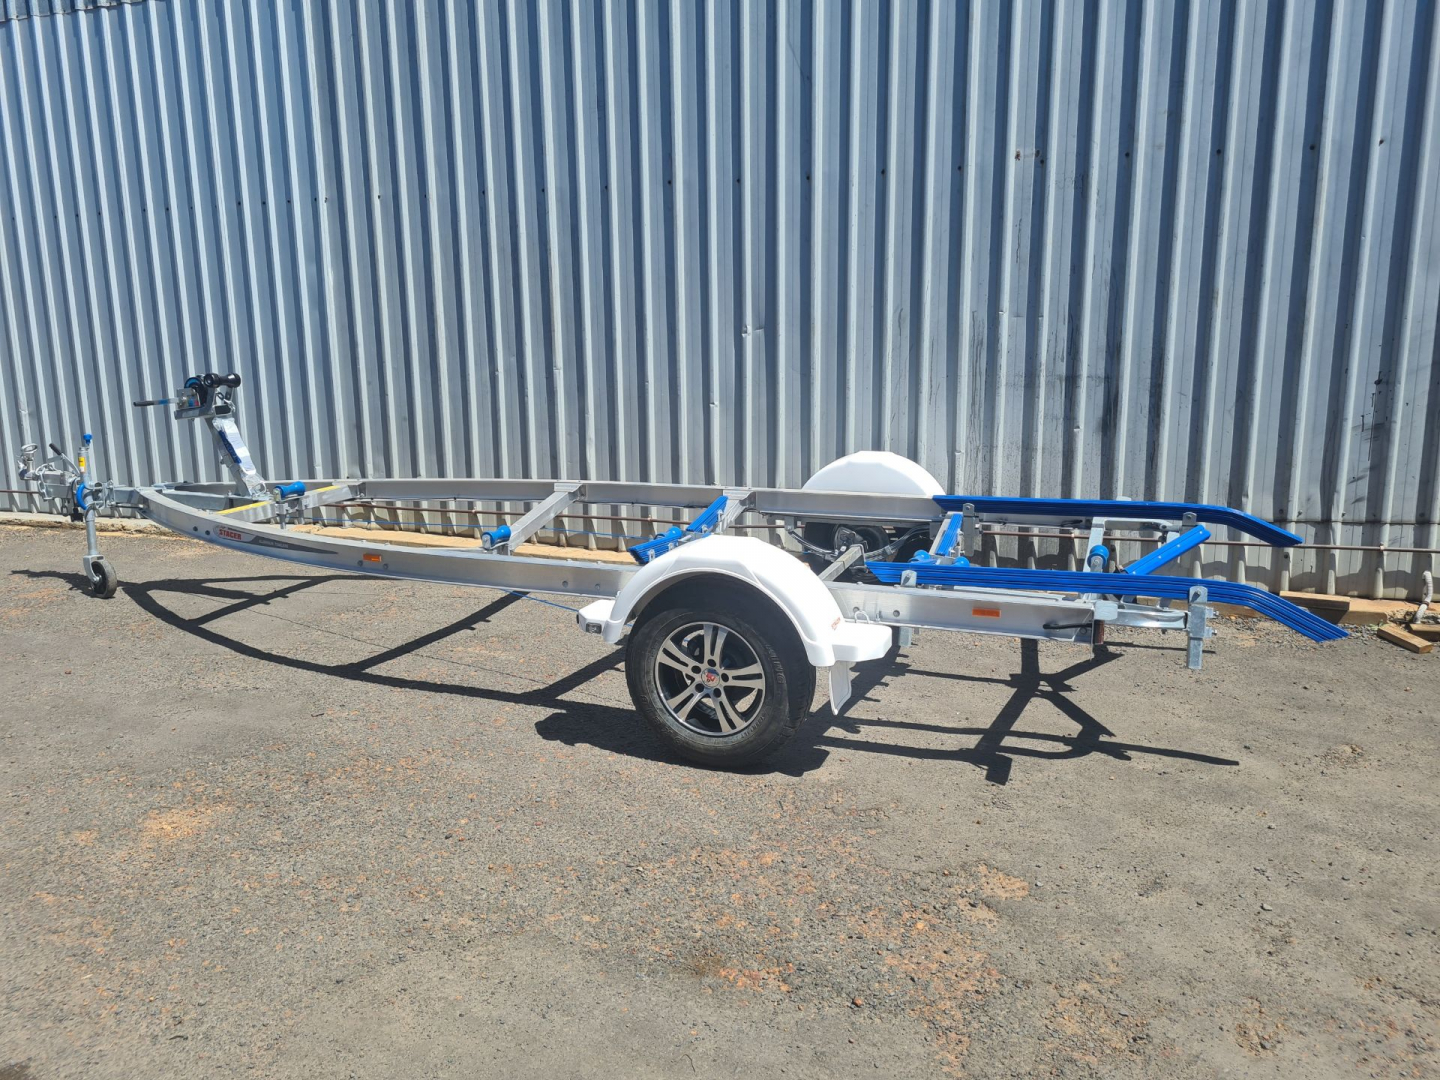 alloy move boat trailer to suite 5.3m to 5.7m boats 1595kg rated